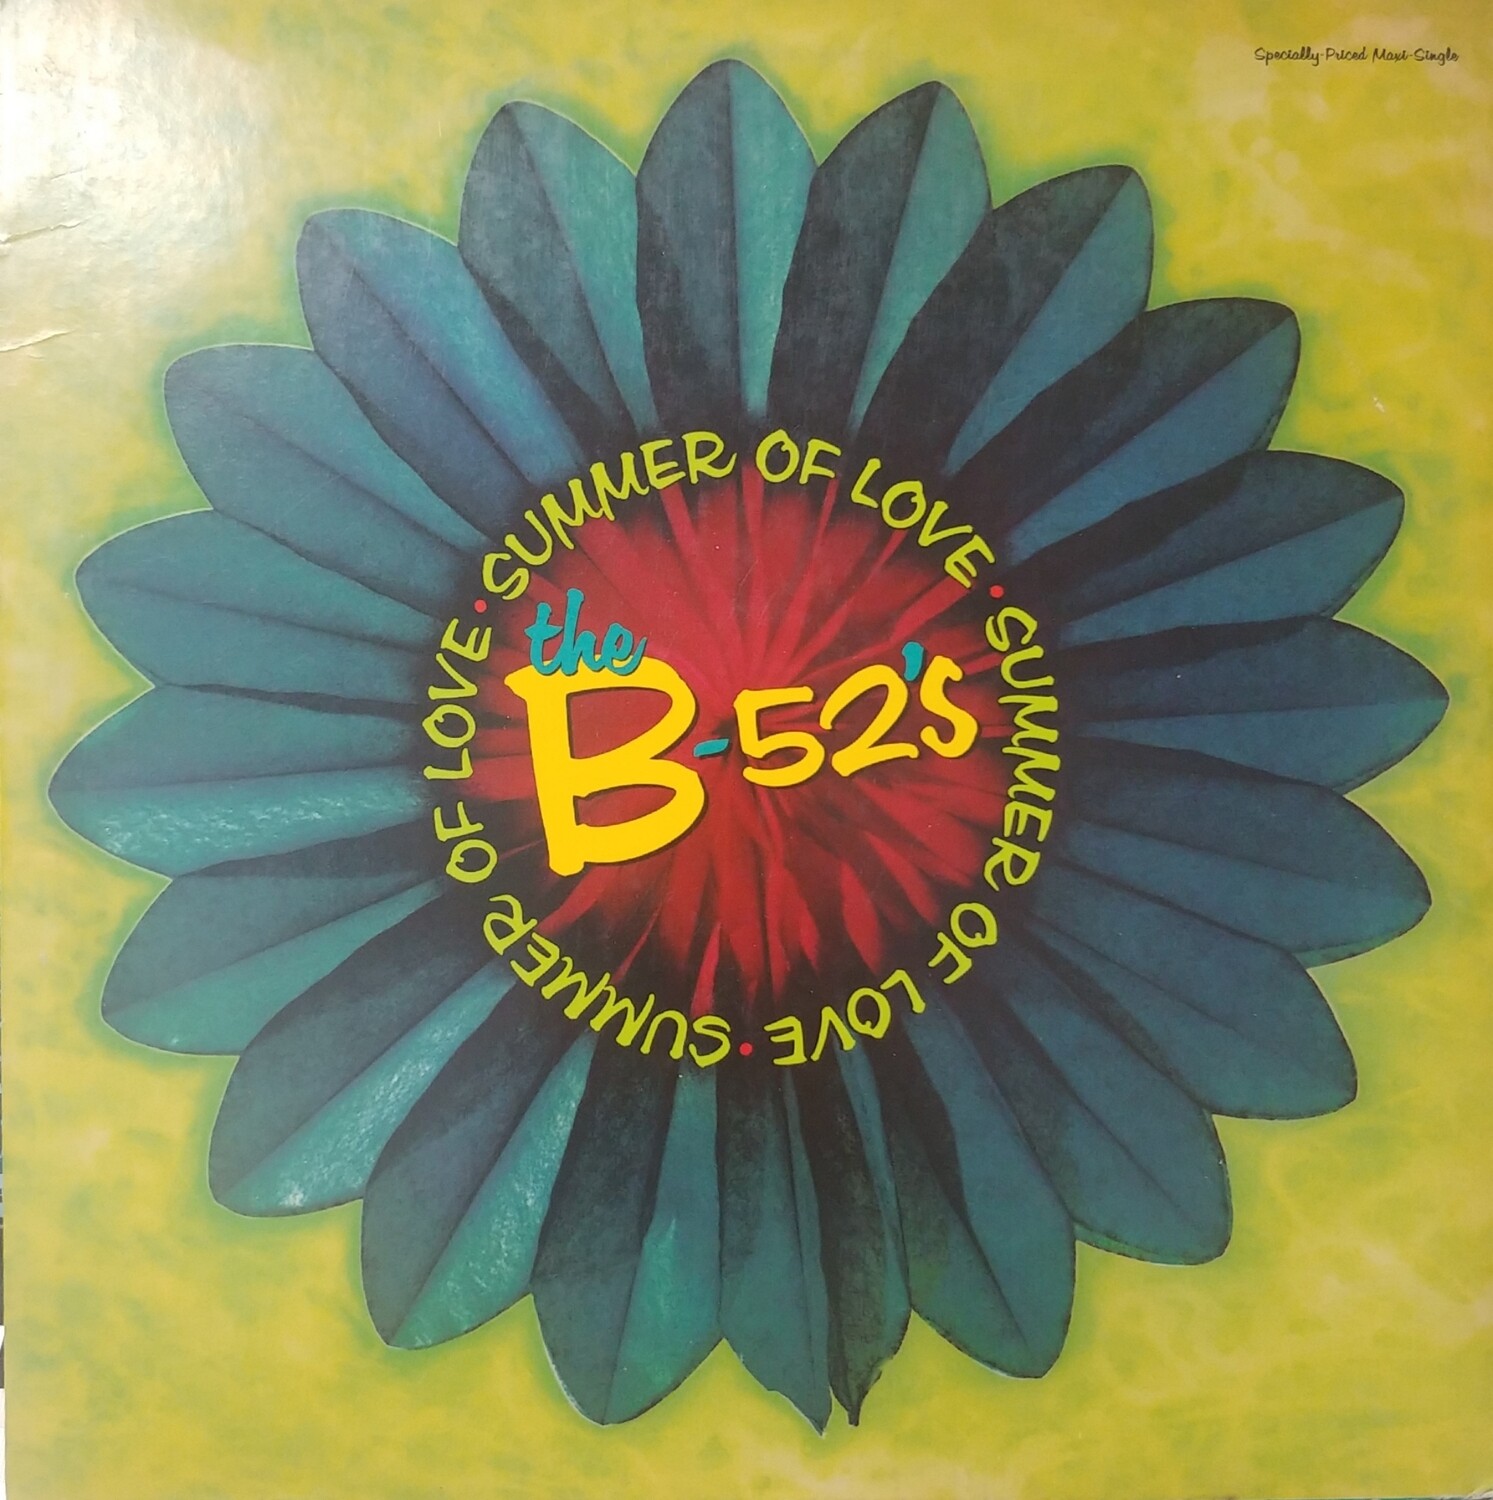 The B-52's - Summer of love